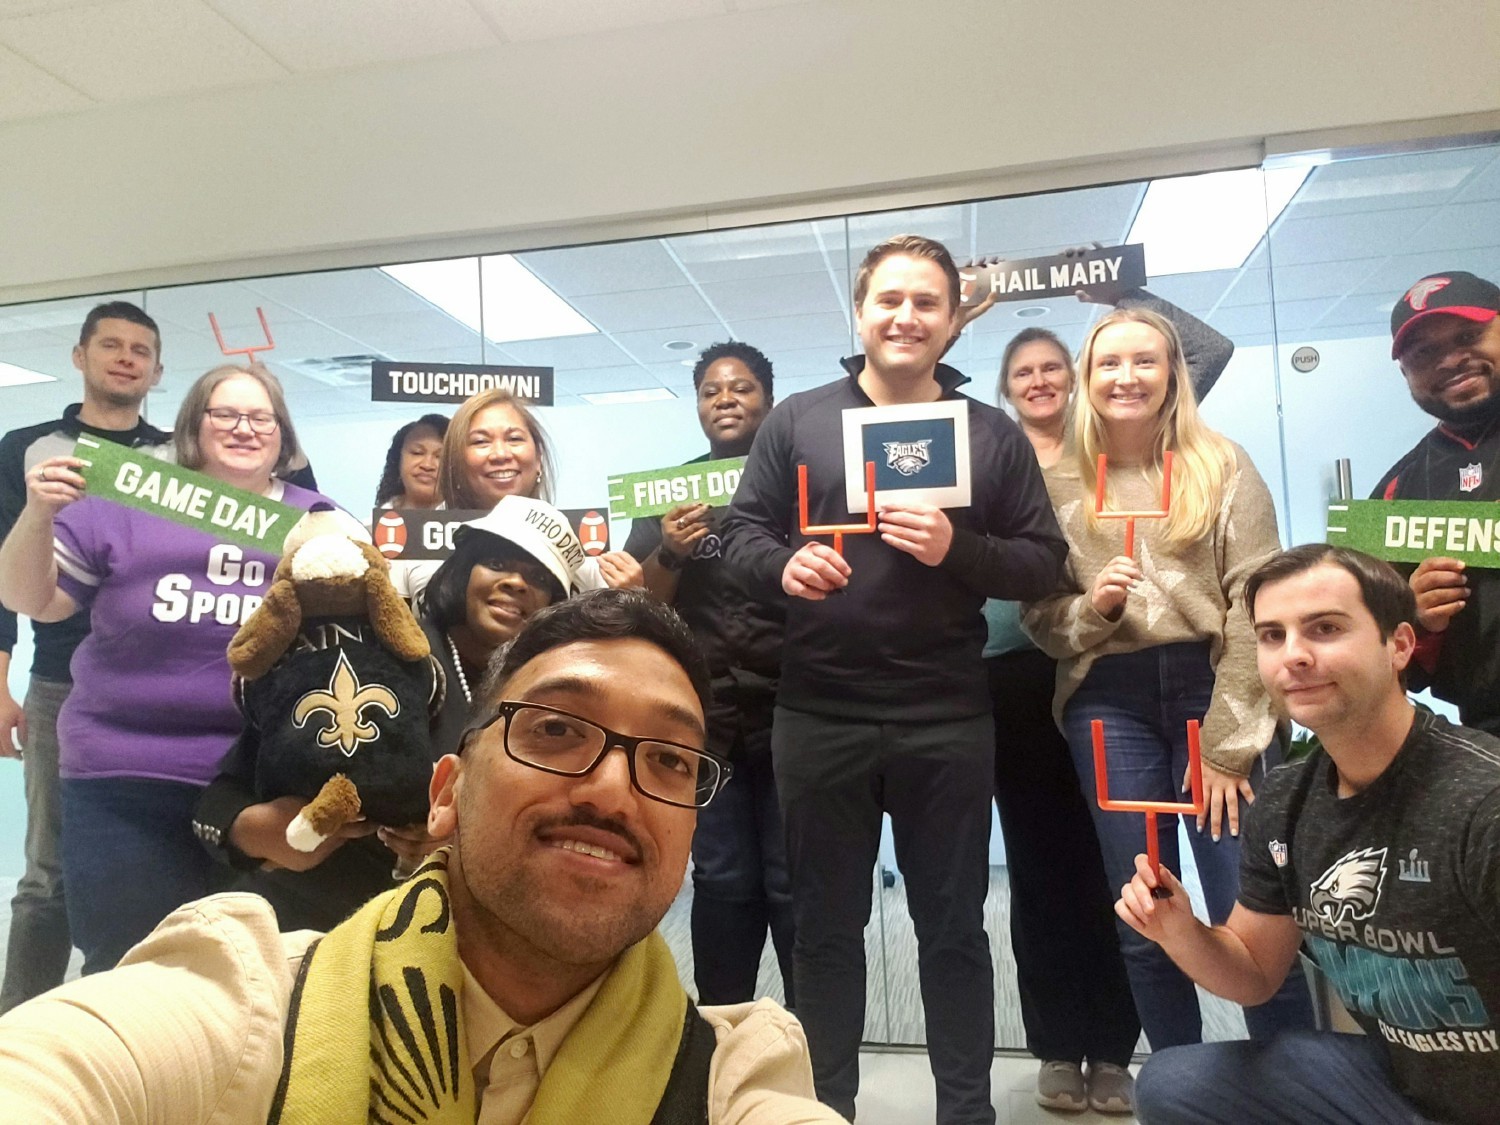 Admiral's Atlanta office celebrated the Superbowl, showing off their favorite teams' gear